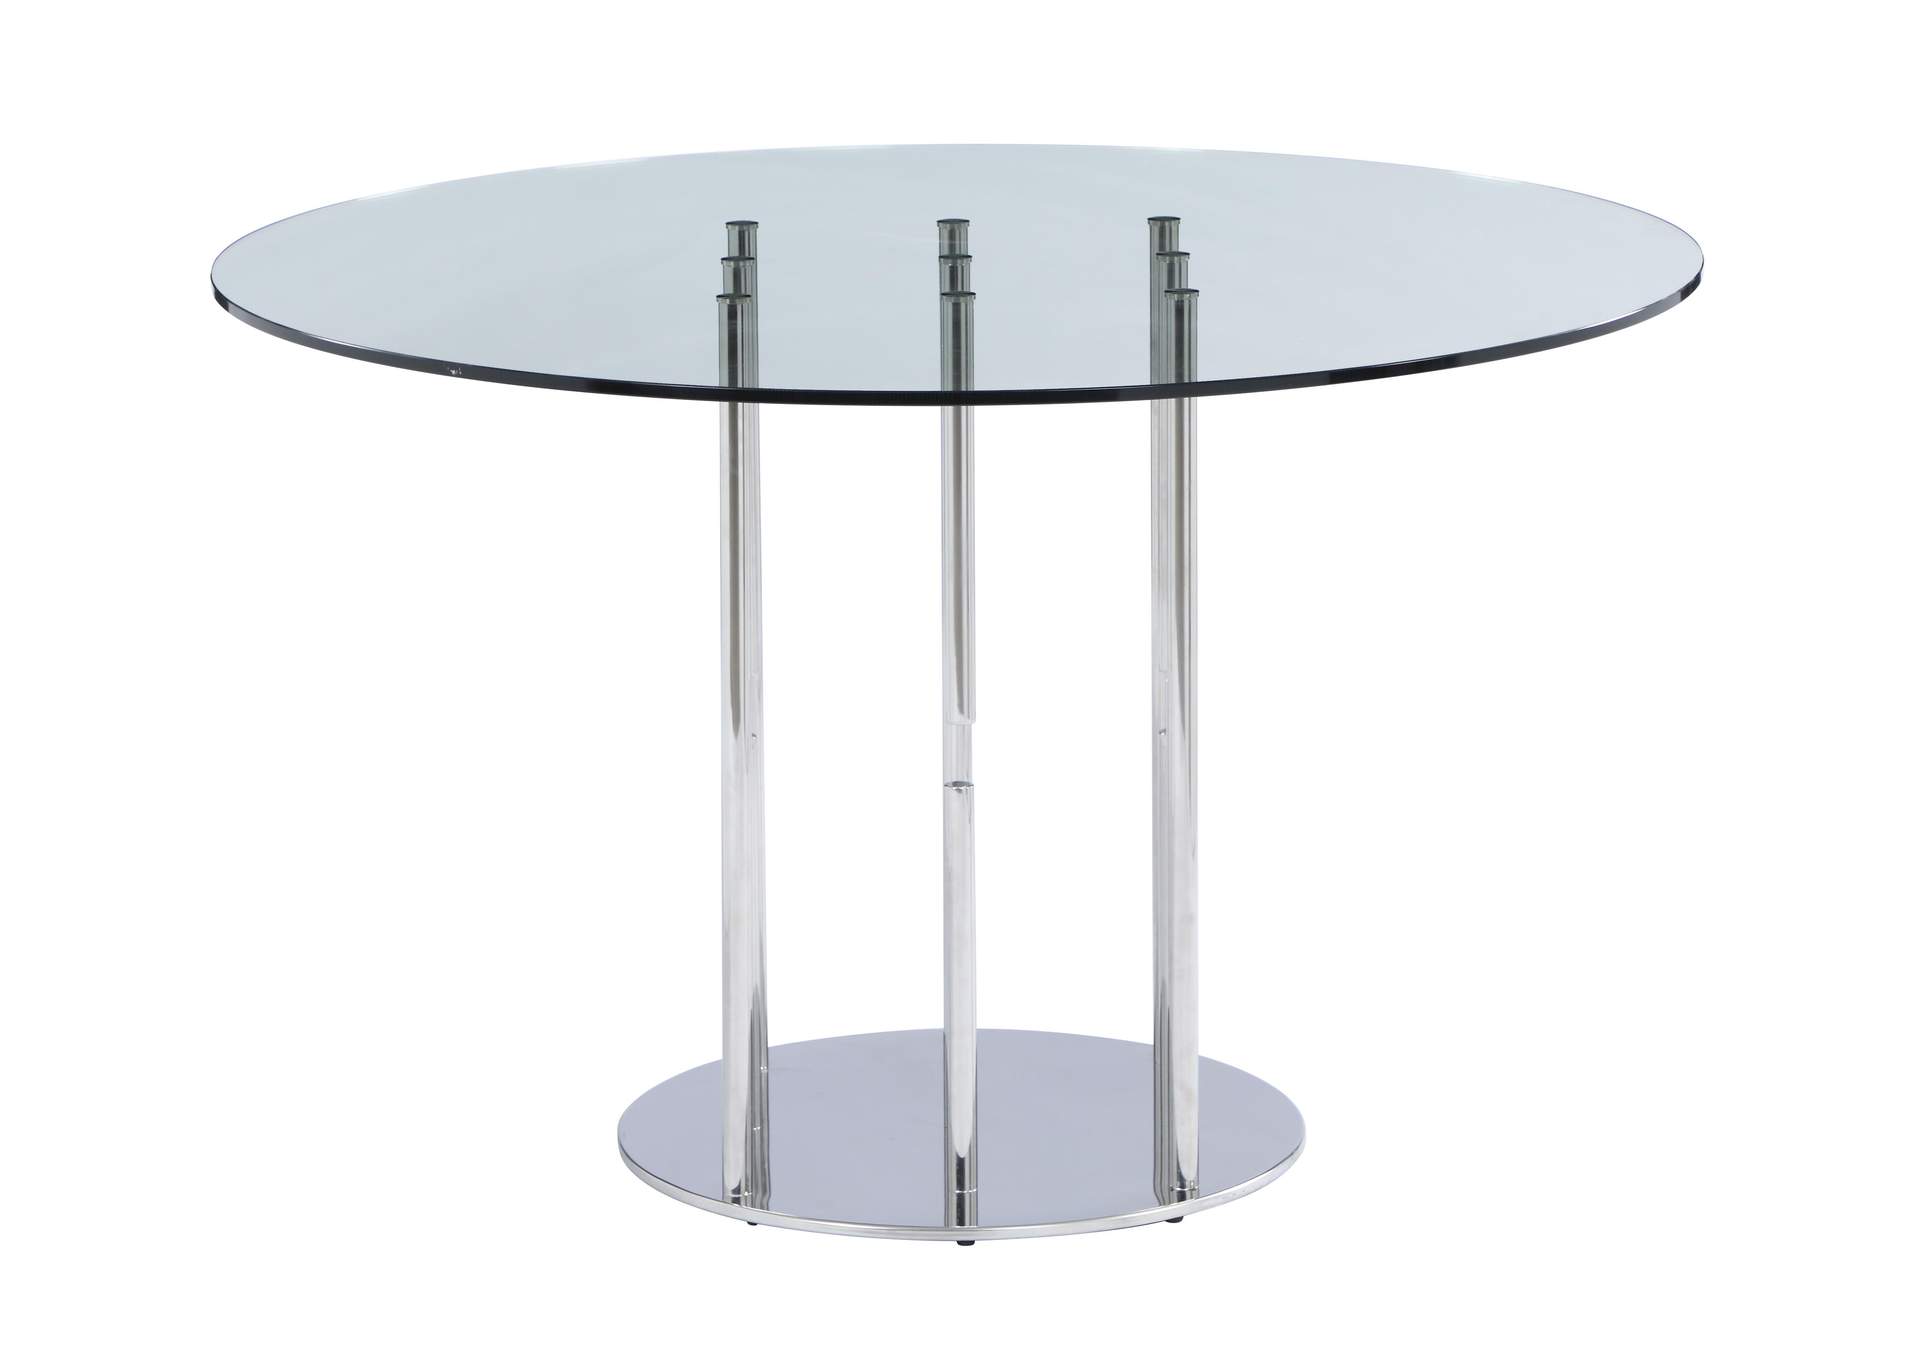 Contemporary Floating Pedestal Dining Table,Chintaly Imports